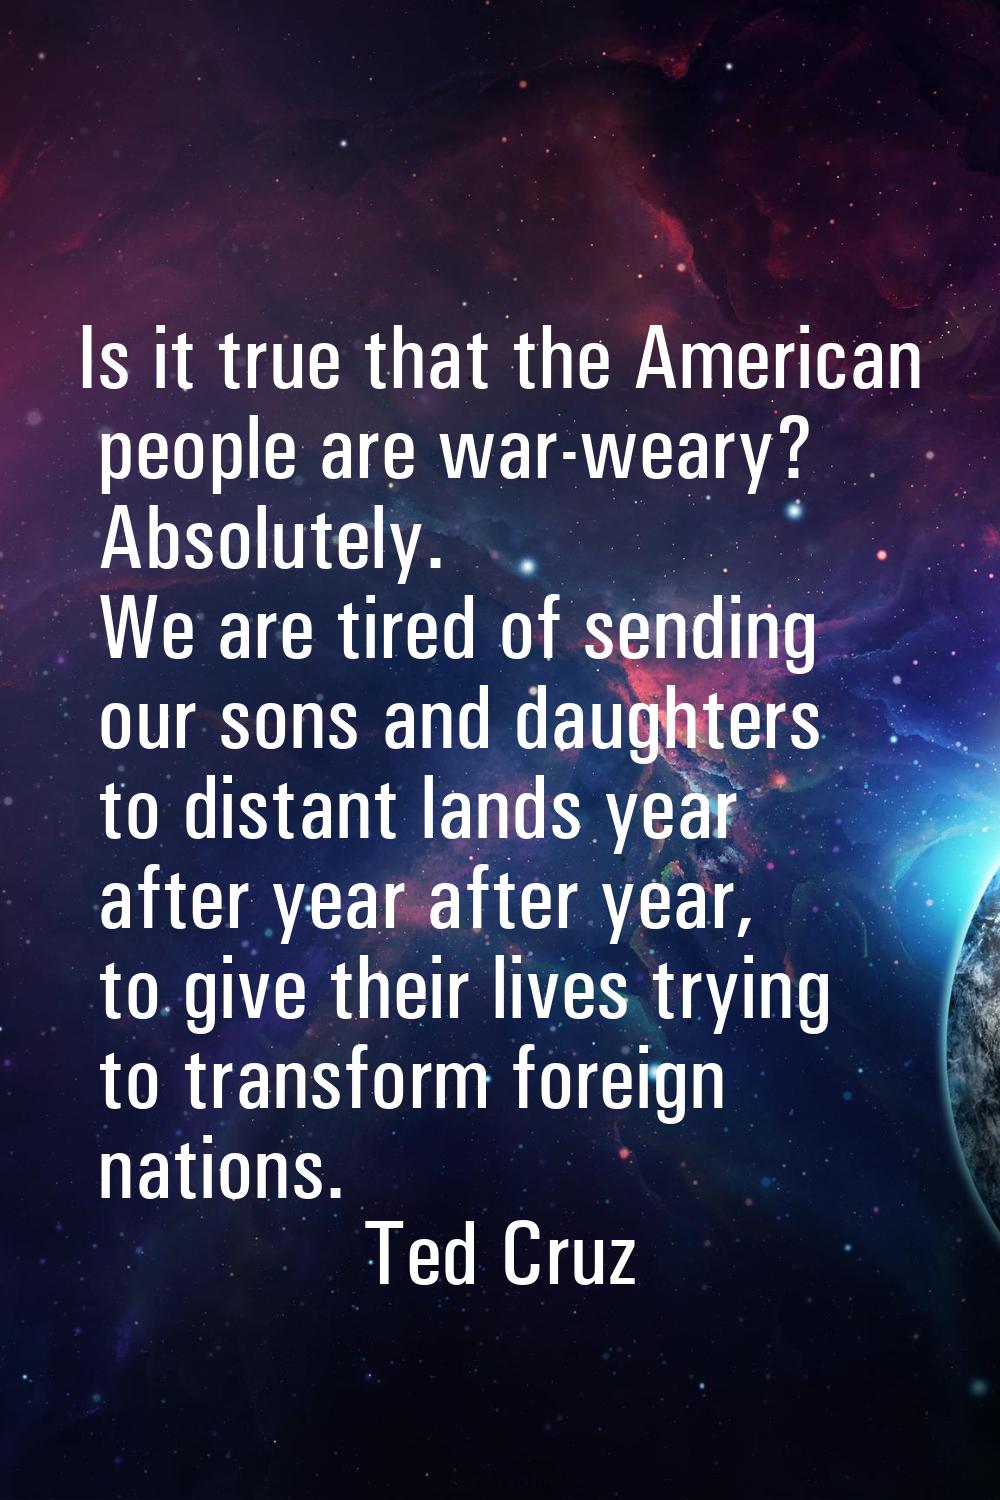 Is it true that the American people are war-weary? Absolutely. We are tired of sending our sons and